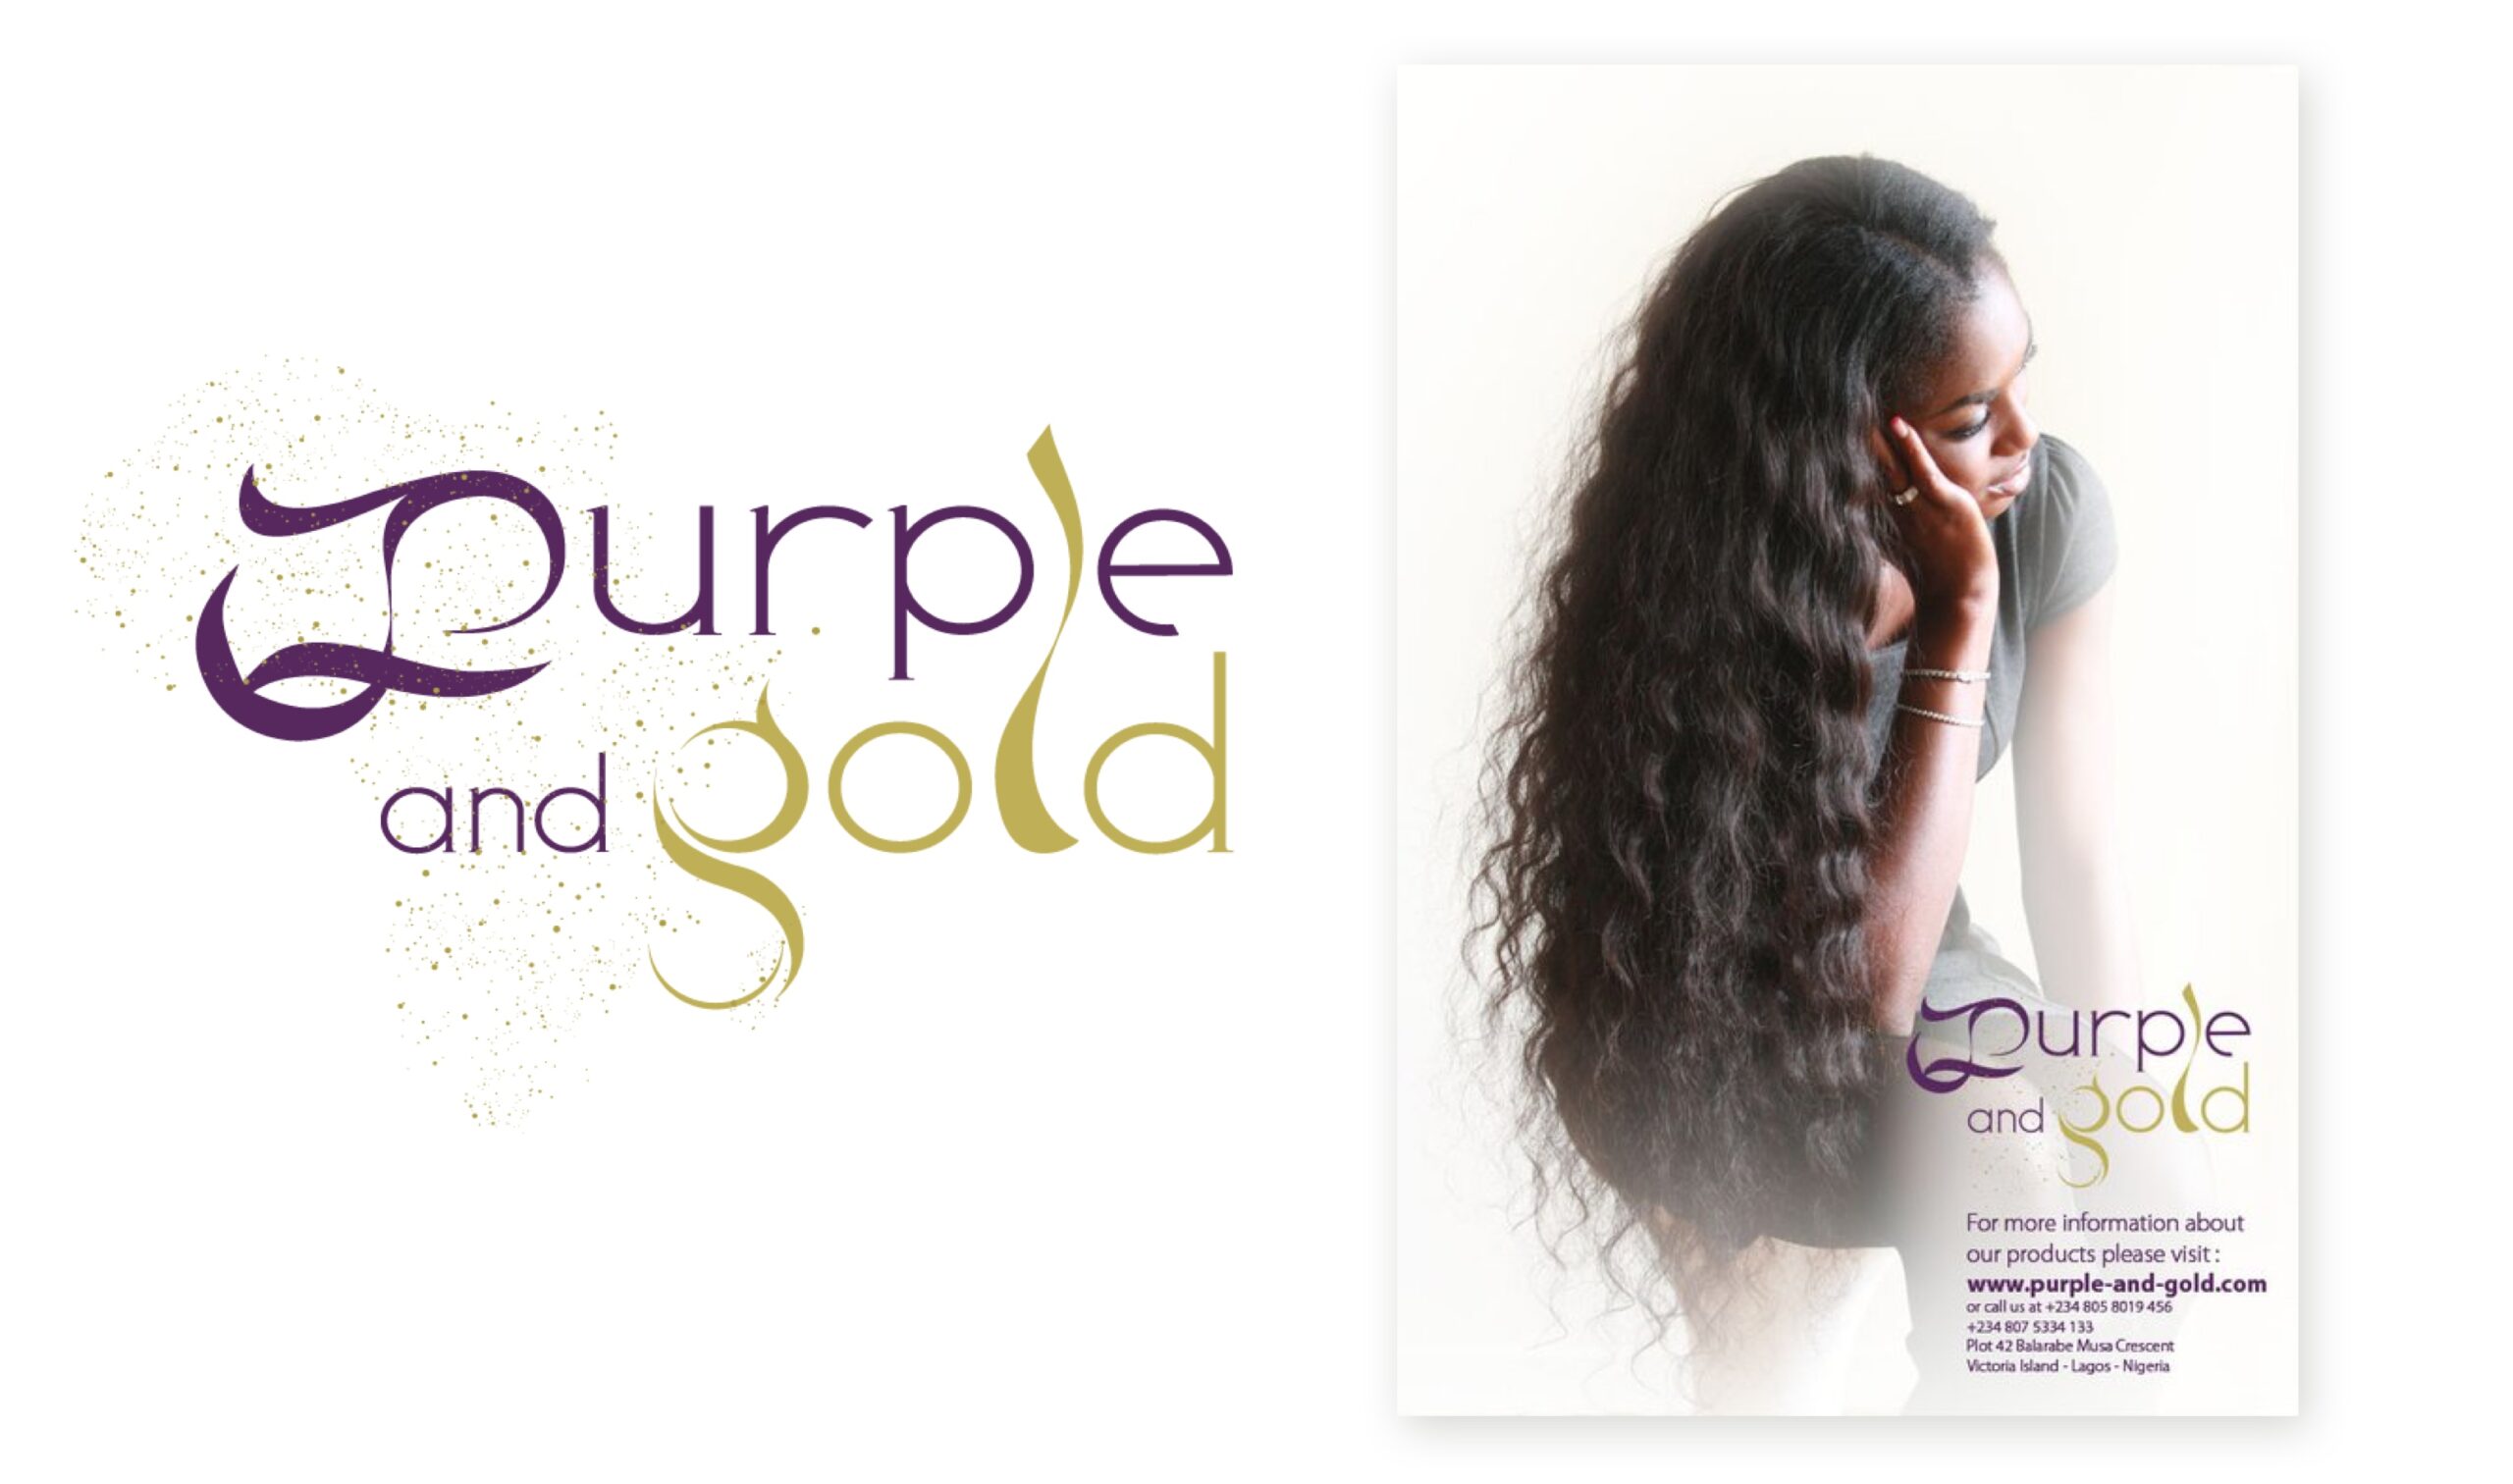 Purple and gold humain hair logo scaled